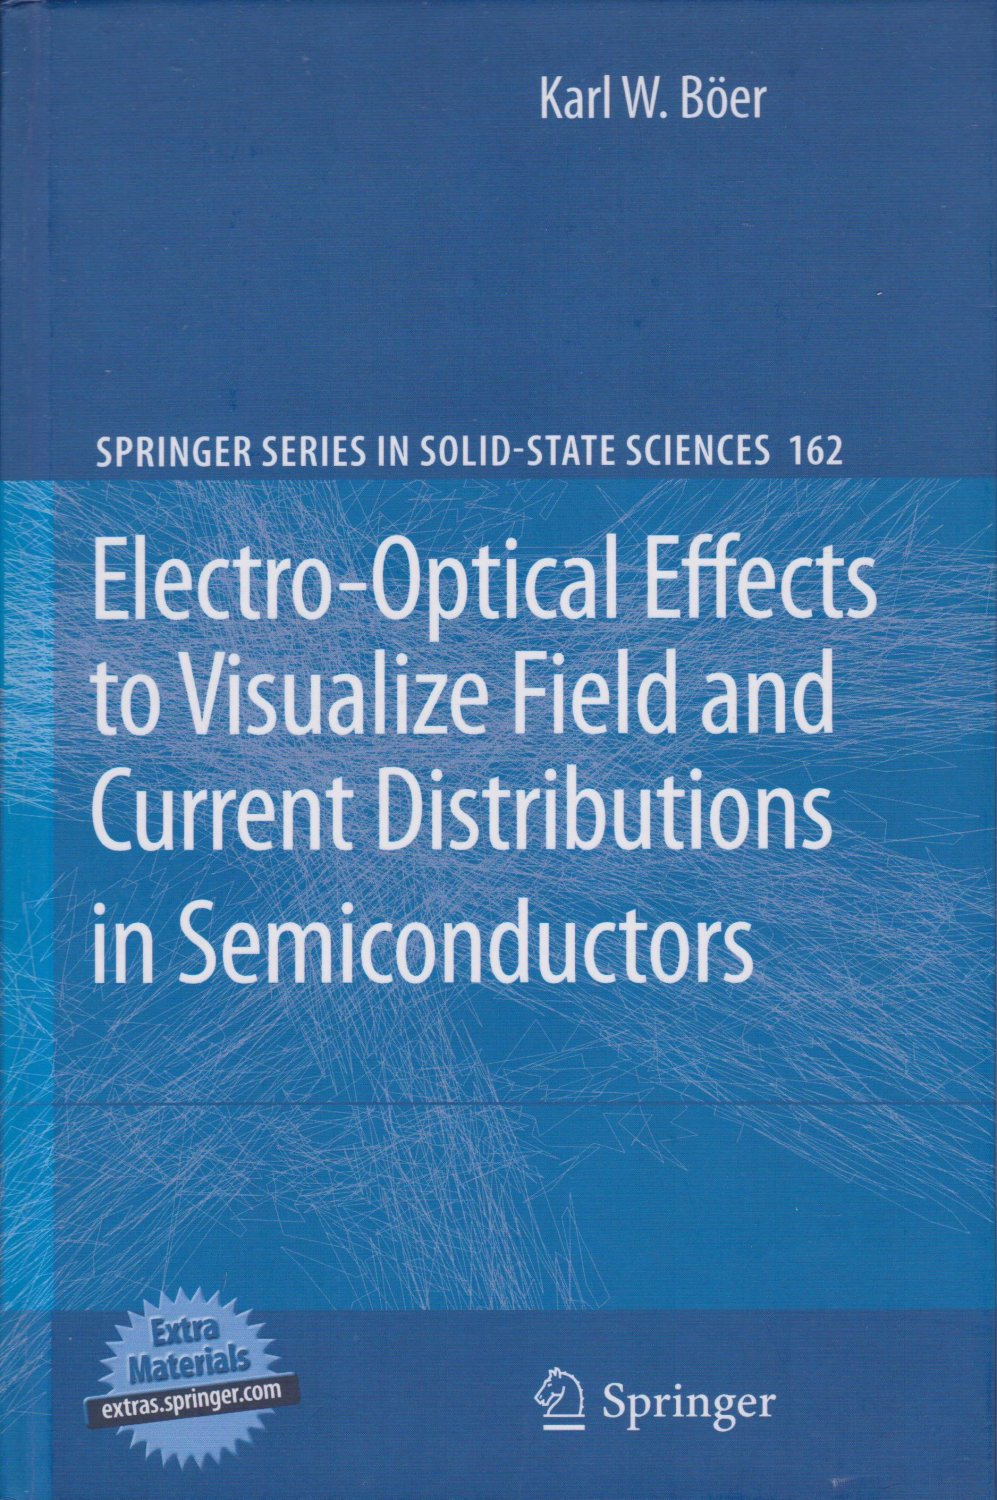 BÖER, Karl W.:  Electro-Optical Effects to Visualize Field and Current Distributions in Semiconductors. 